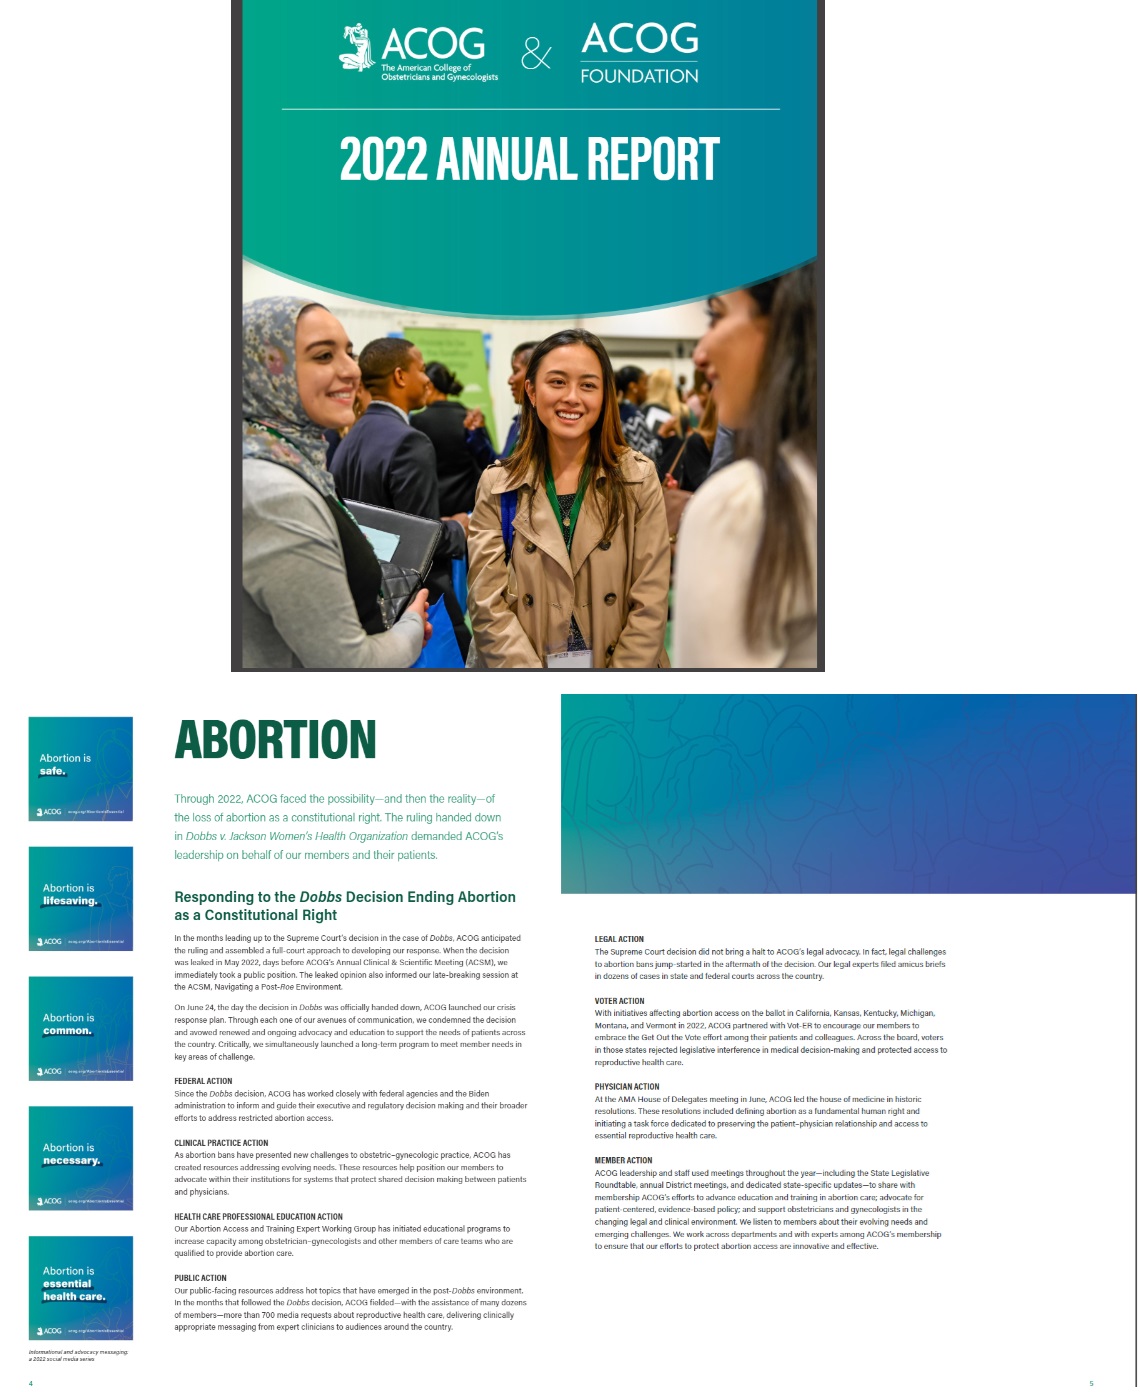 The American College of Obstetricians and Gynecologists 2022AR promotes abortion